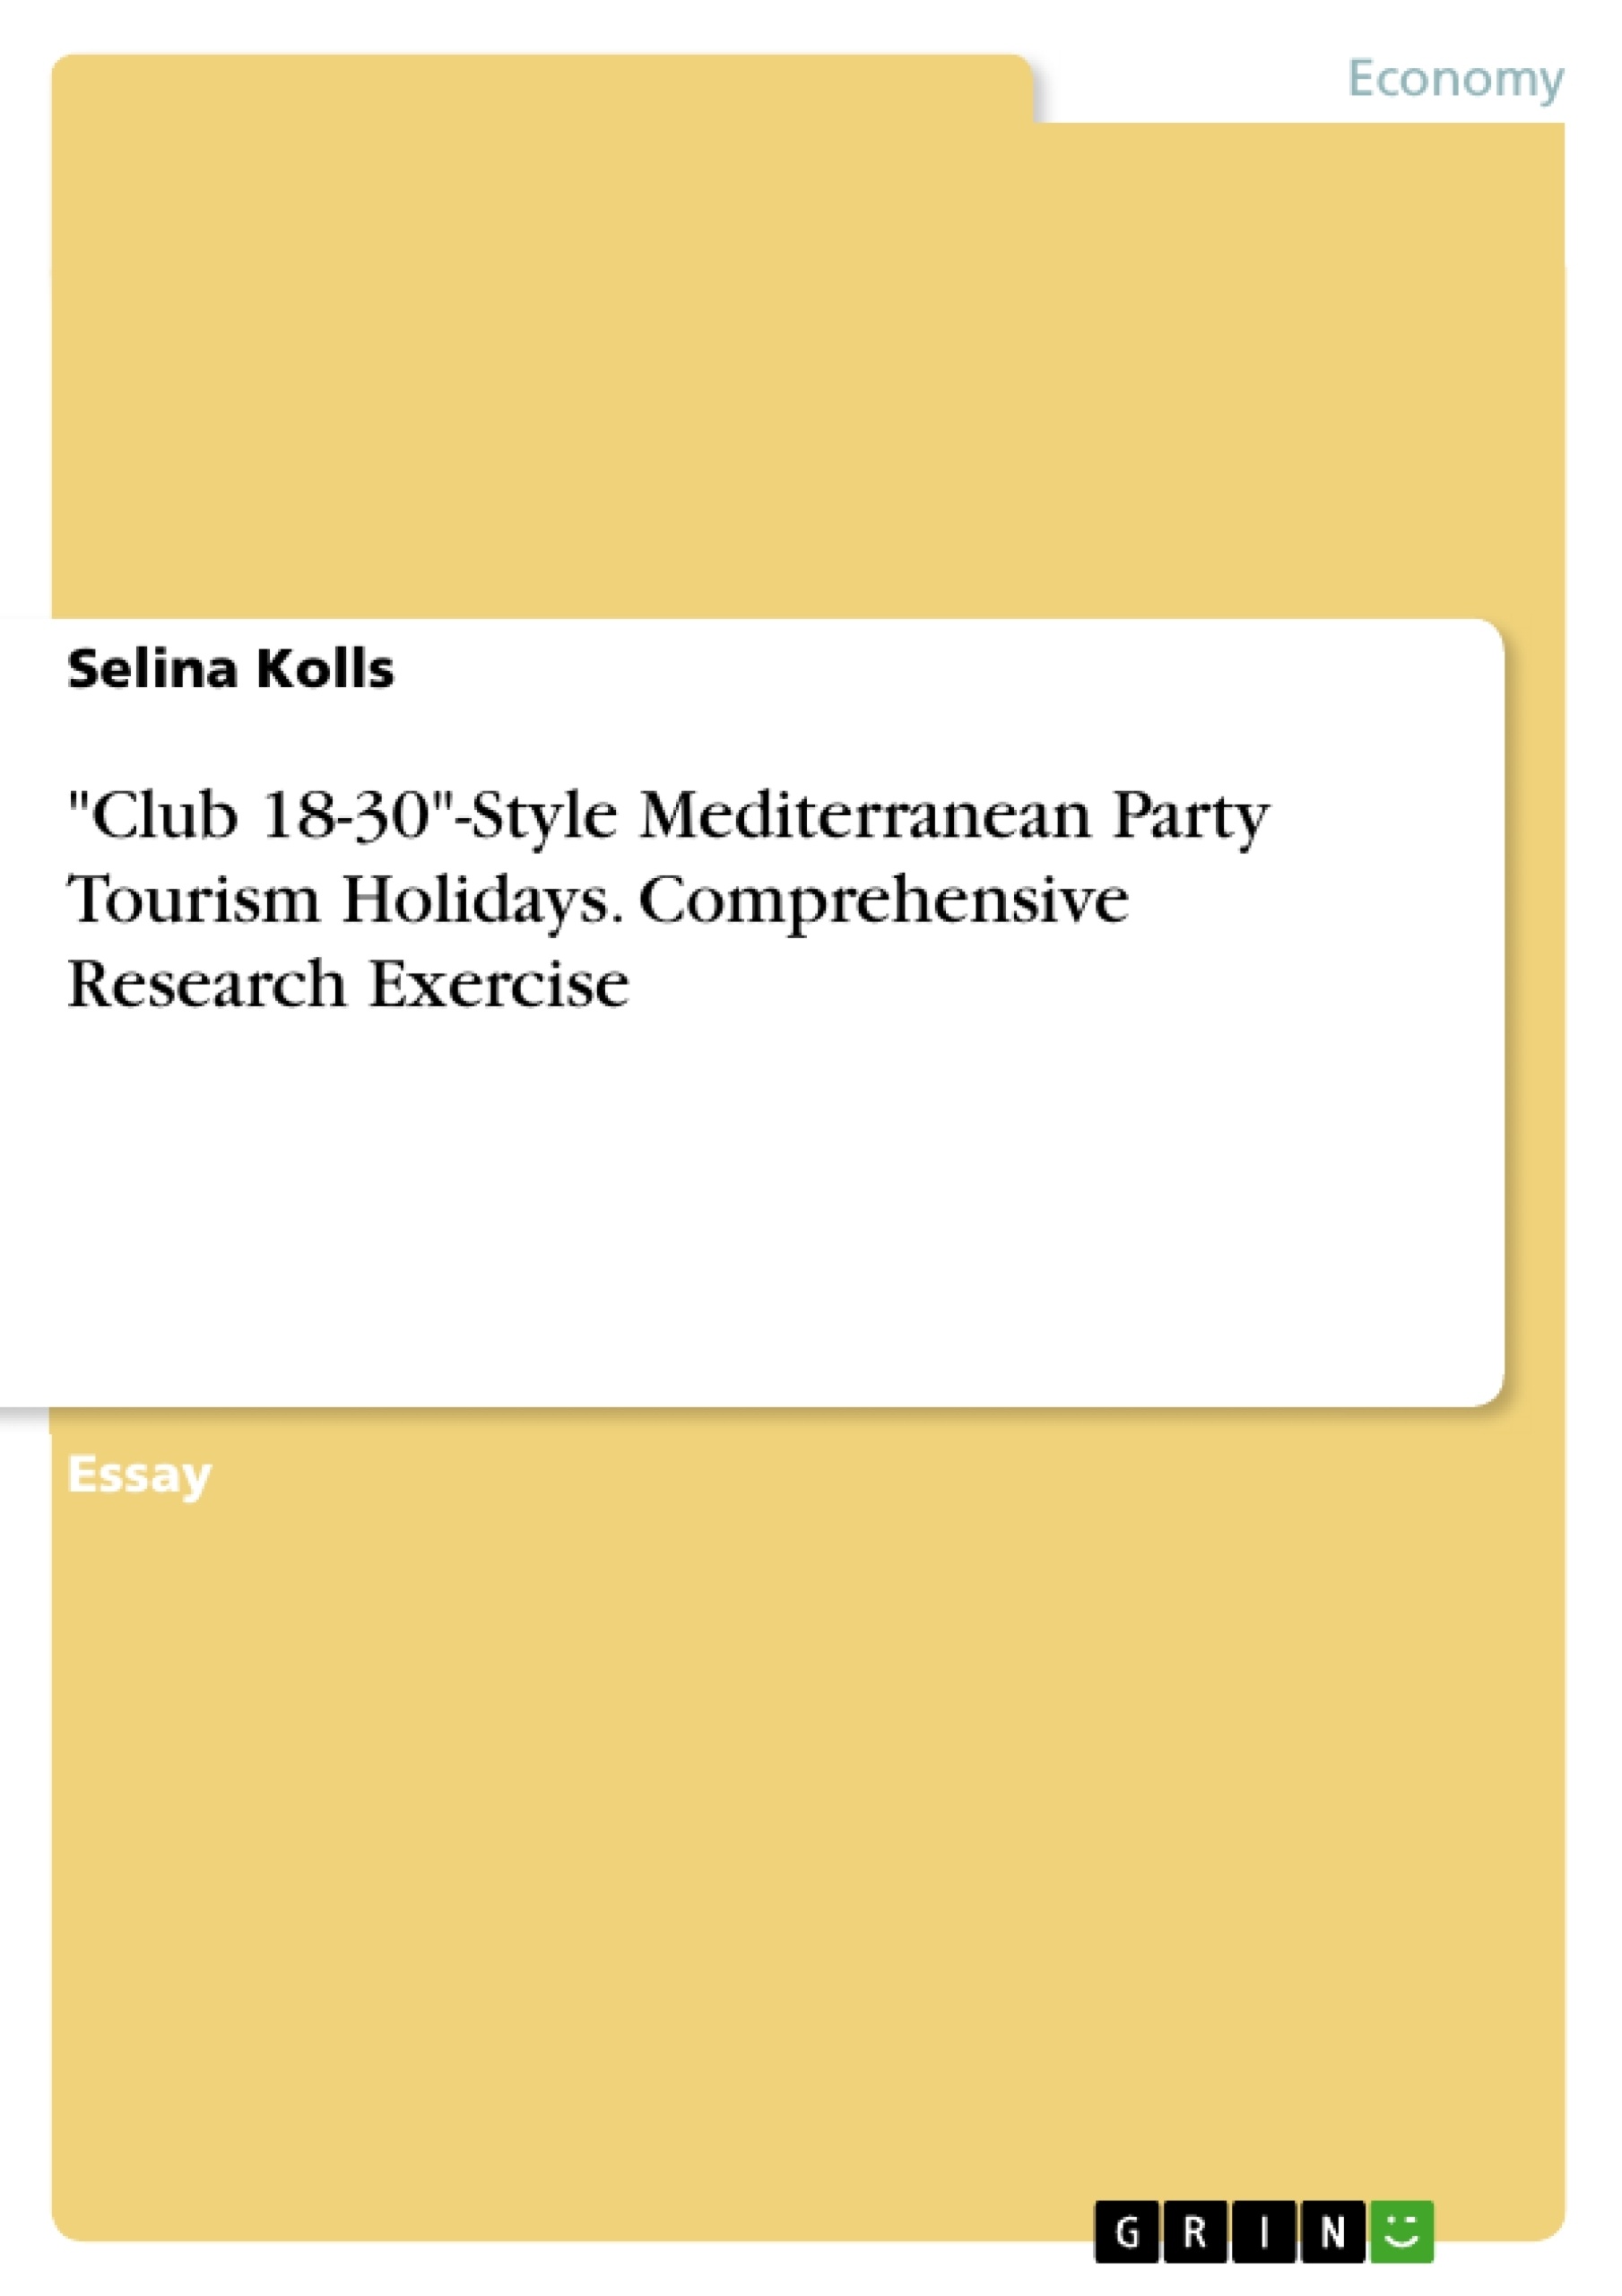 Titre: "Club 18-30"-Style Mediterranean Party Tourism Holidays. Comprehensive Research Exercise